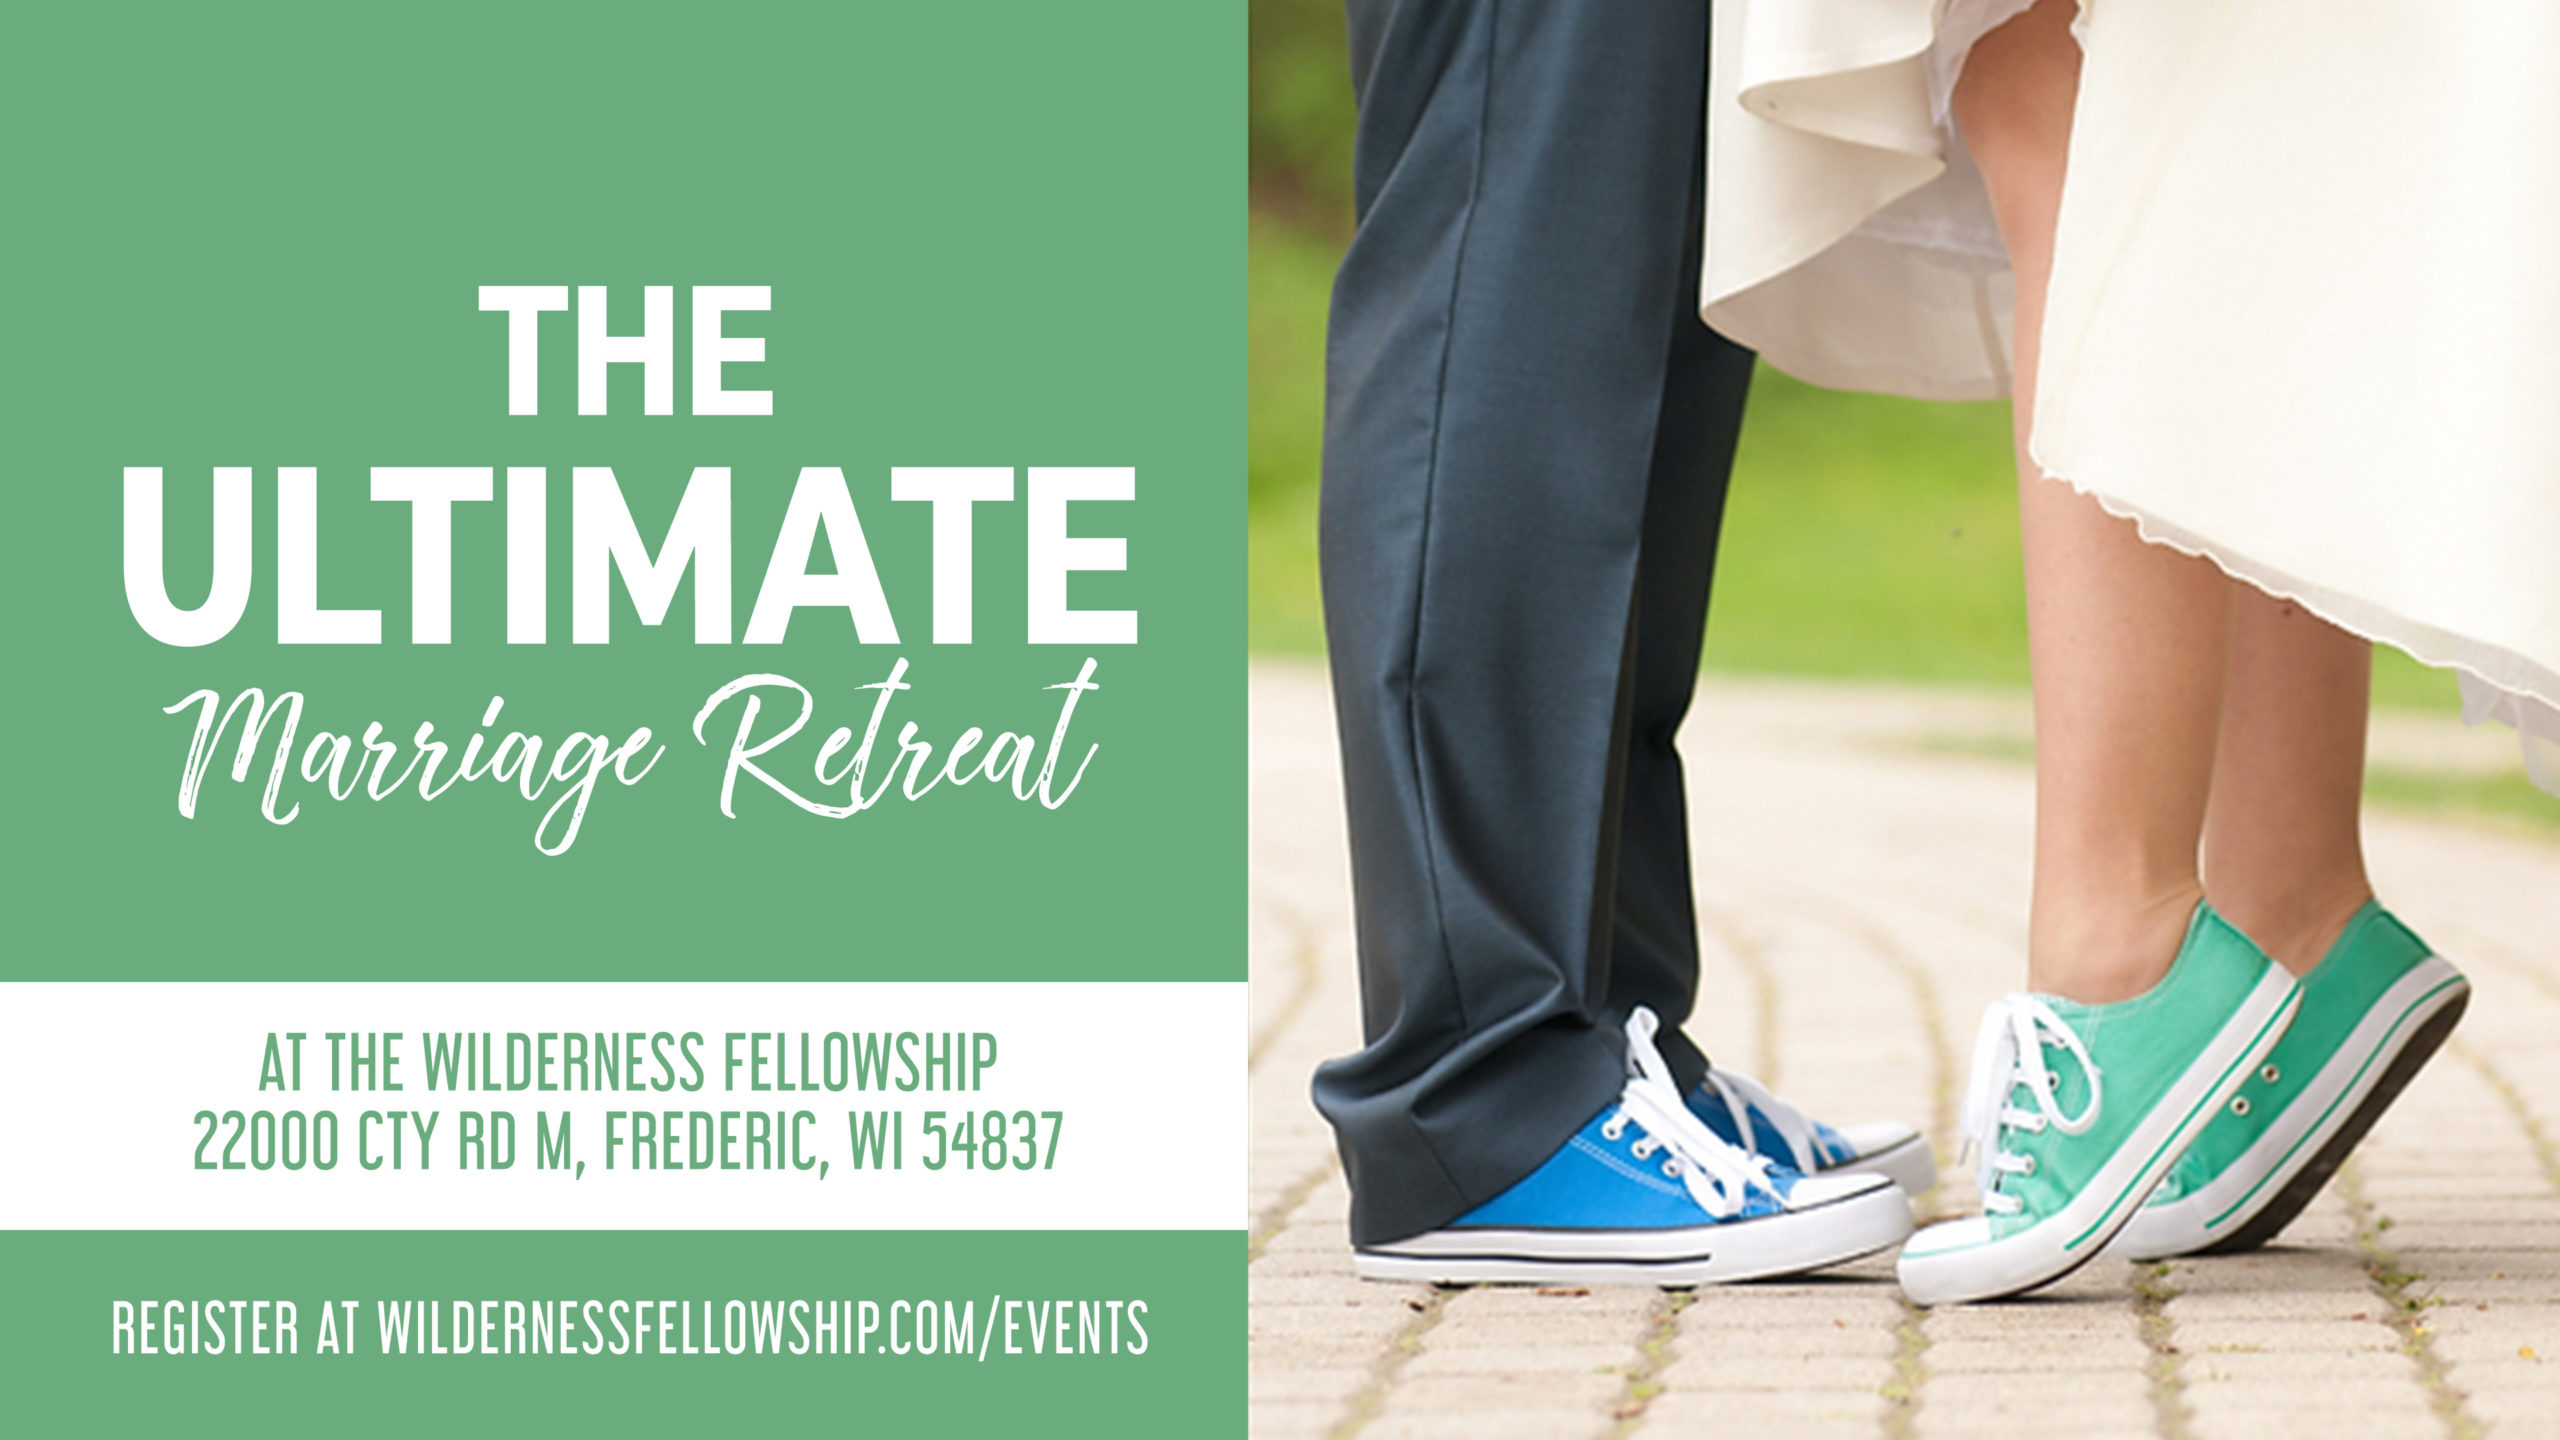 The Ultimate Marriage Retreat